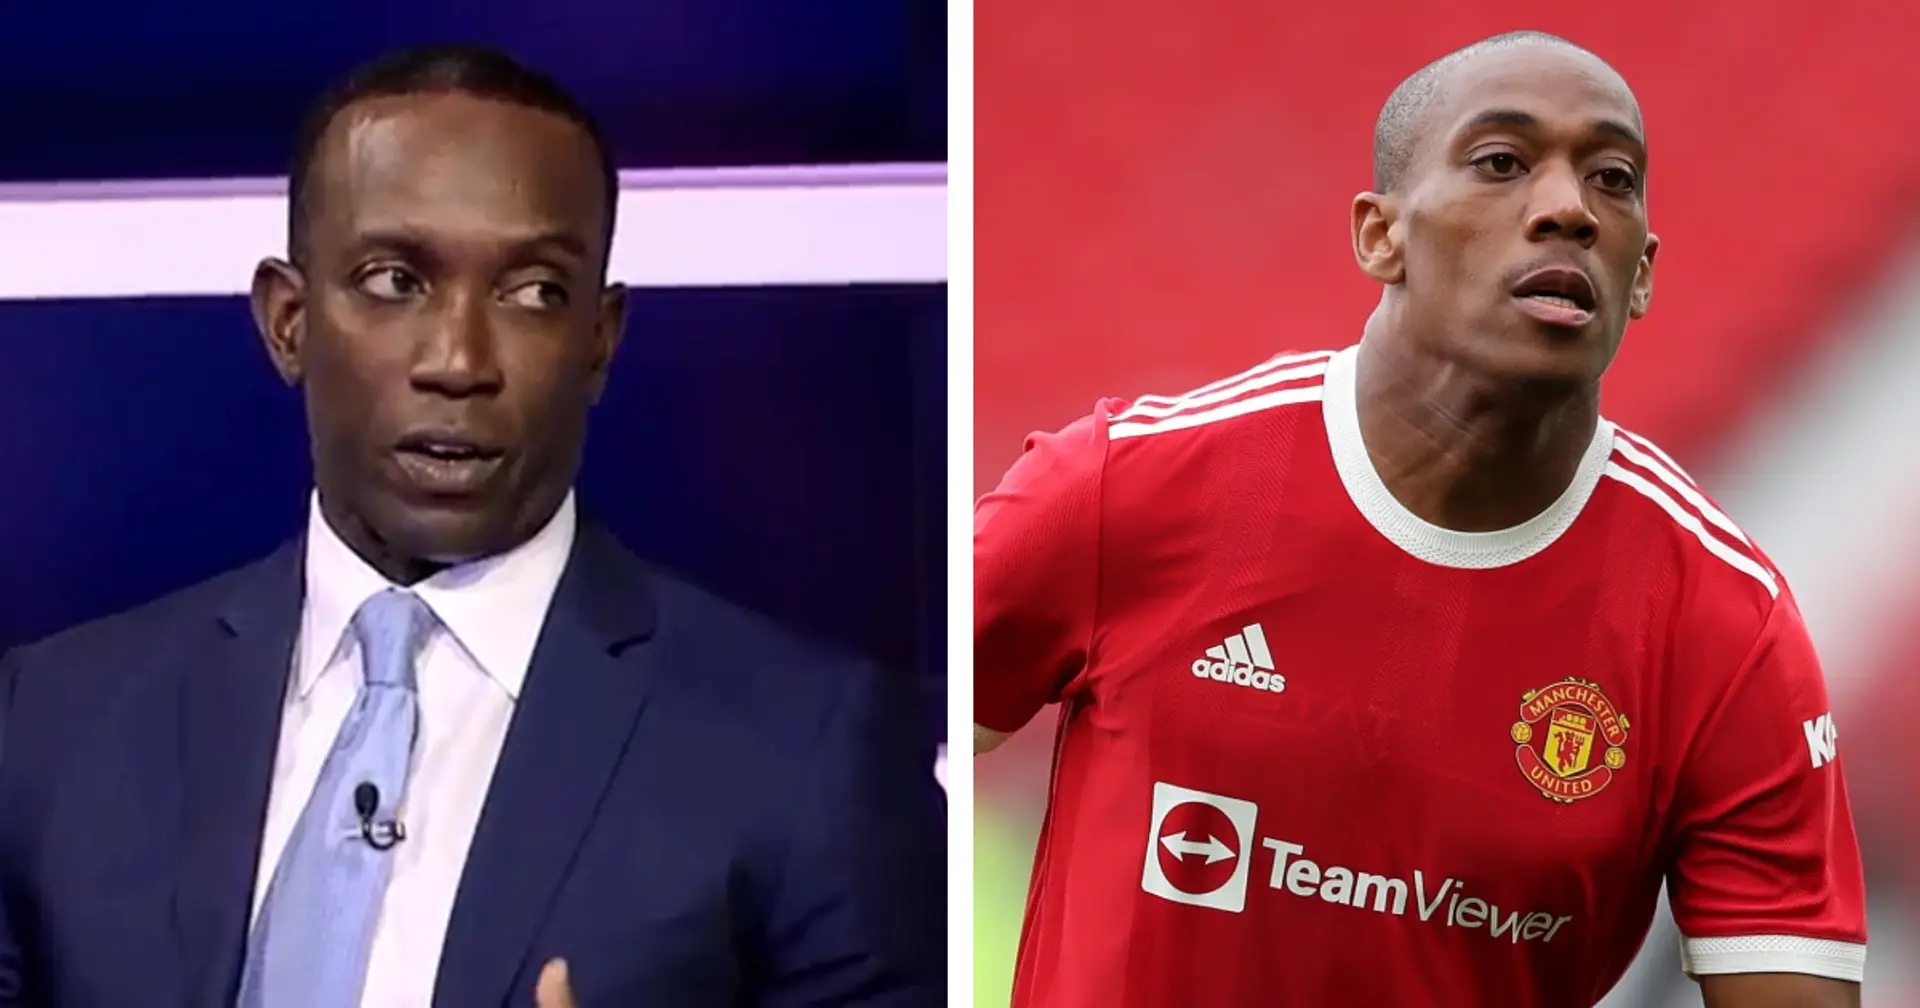 'He's got to buckle down if he has a future at Man United': Dwight Yorke sends warning to Martial